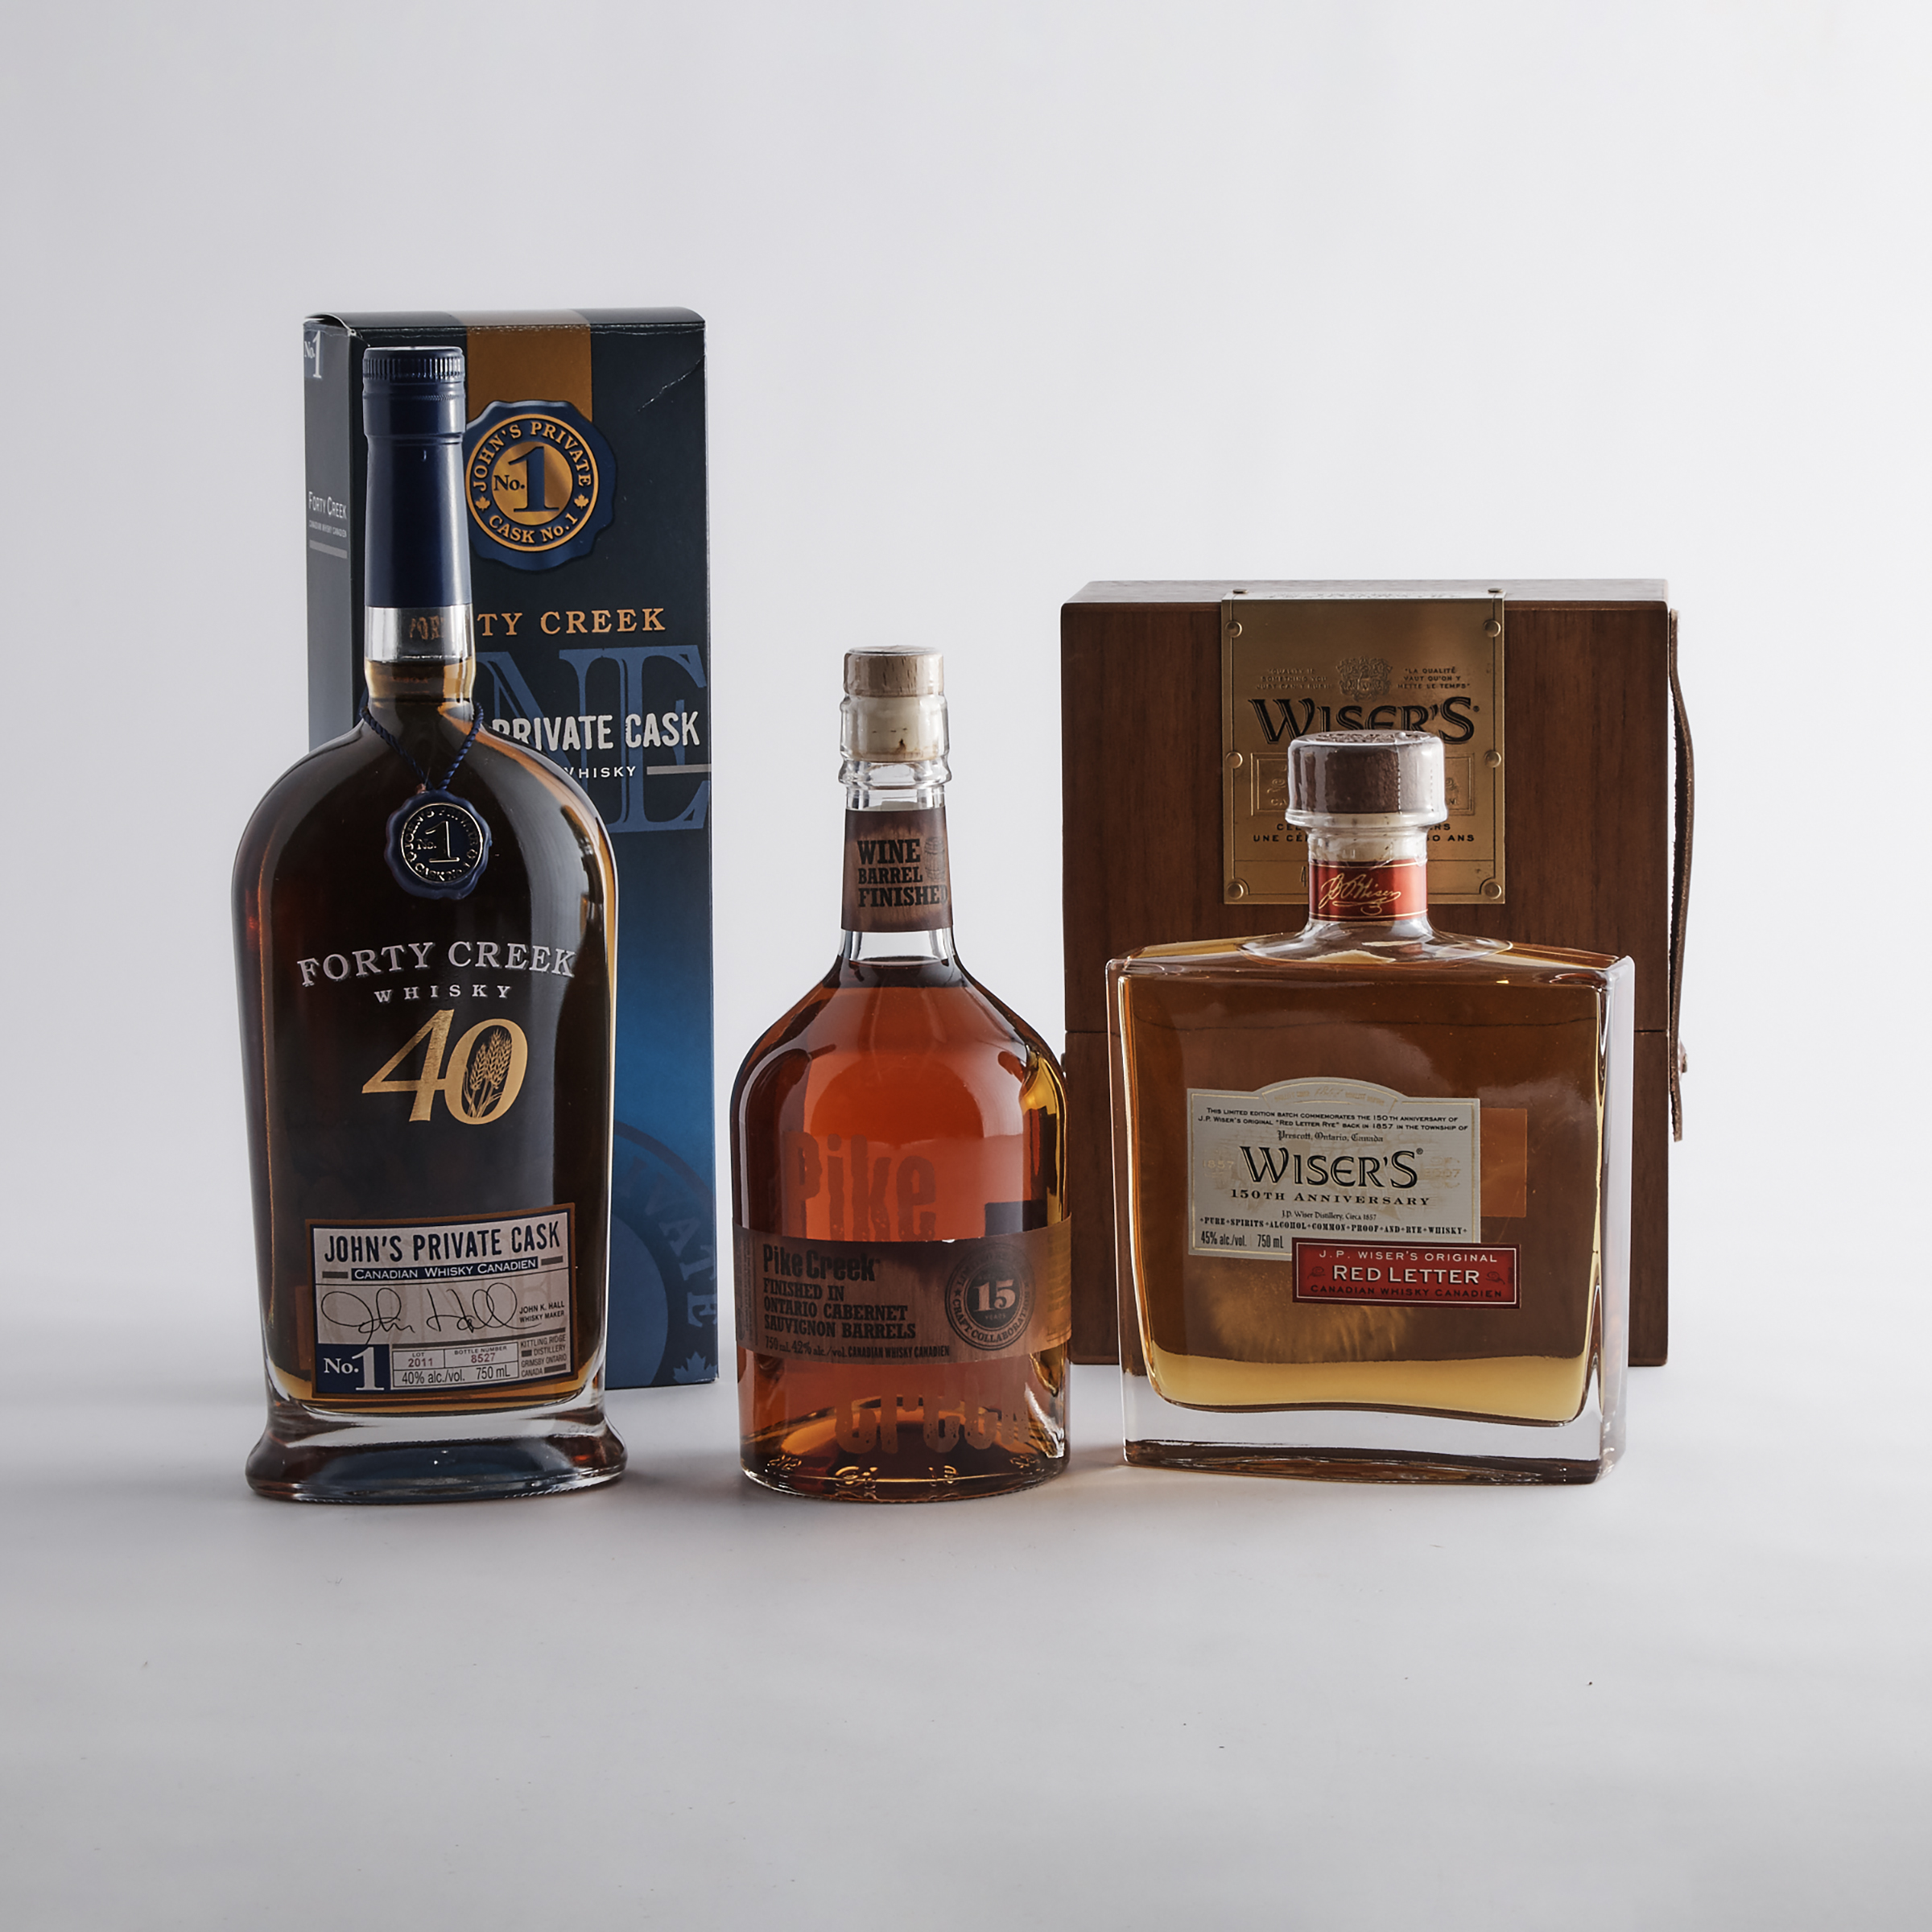 FORTY CREEK JOHN'S PRIVATE CASK CANADIAN WHISKY (ONE 750 ML)
PIKE CREEK CANADIAN WHISKY 15 YEARS (ONE 750 ML)
WISER'S RED LETTER CANADIAN WHISKY (ONE 750 ML)